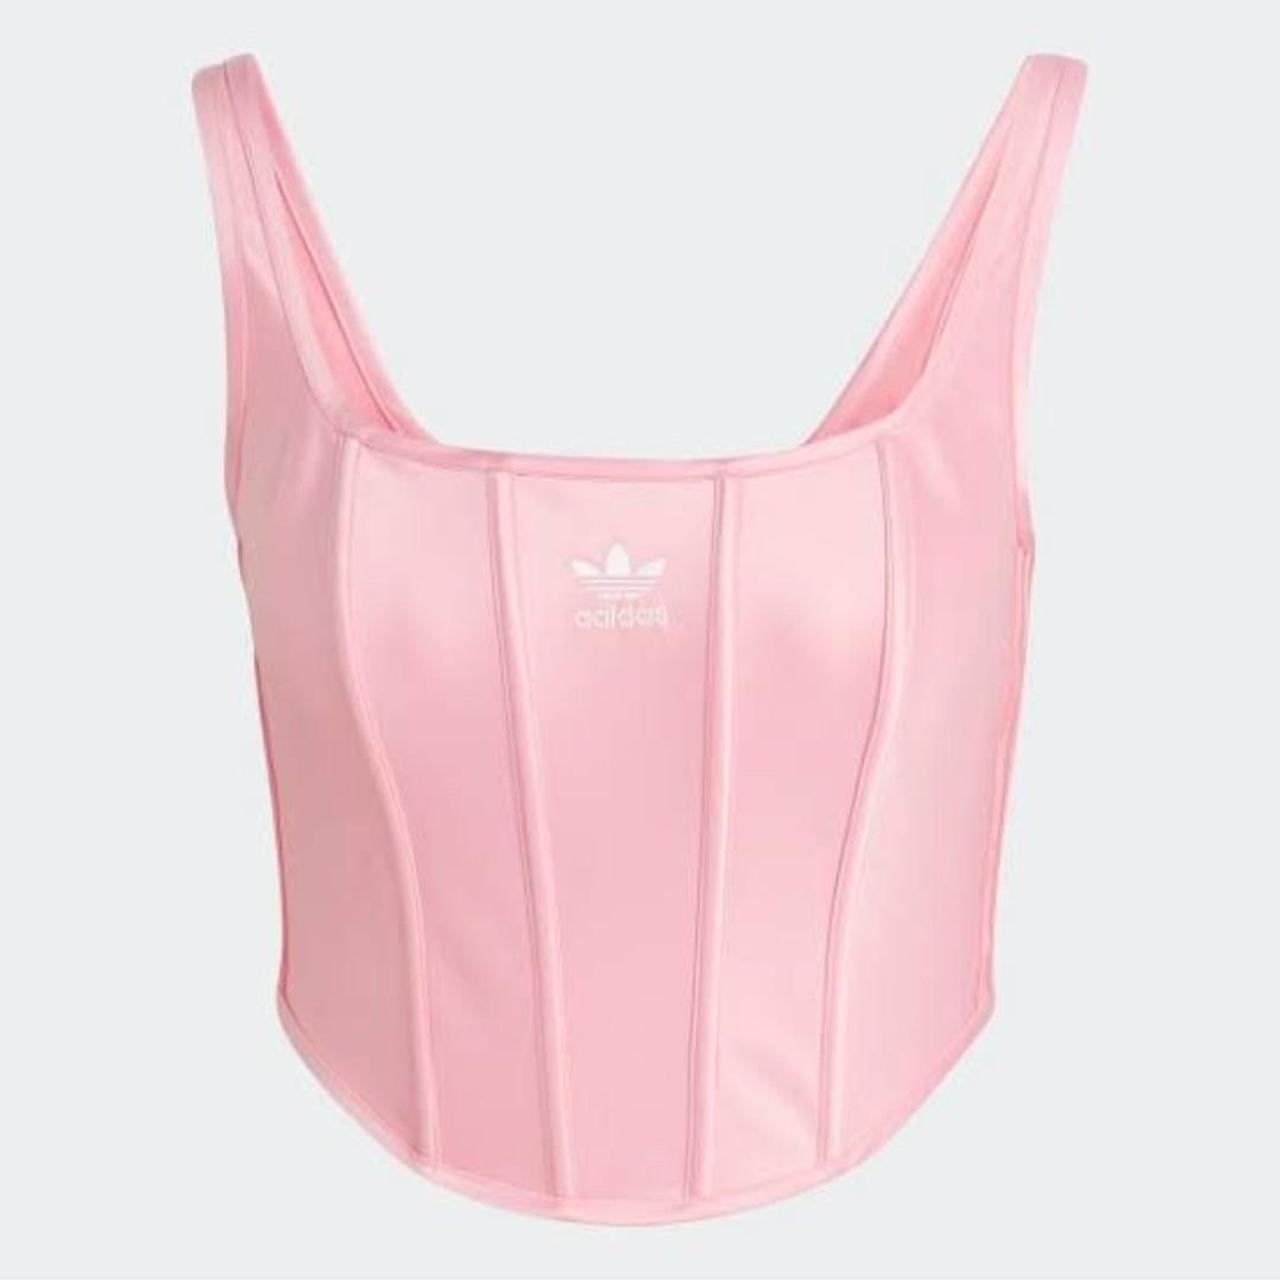 Corset Adidas Pink size 12 UK in Synthetic - 41210371